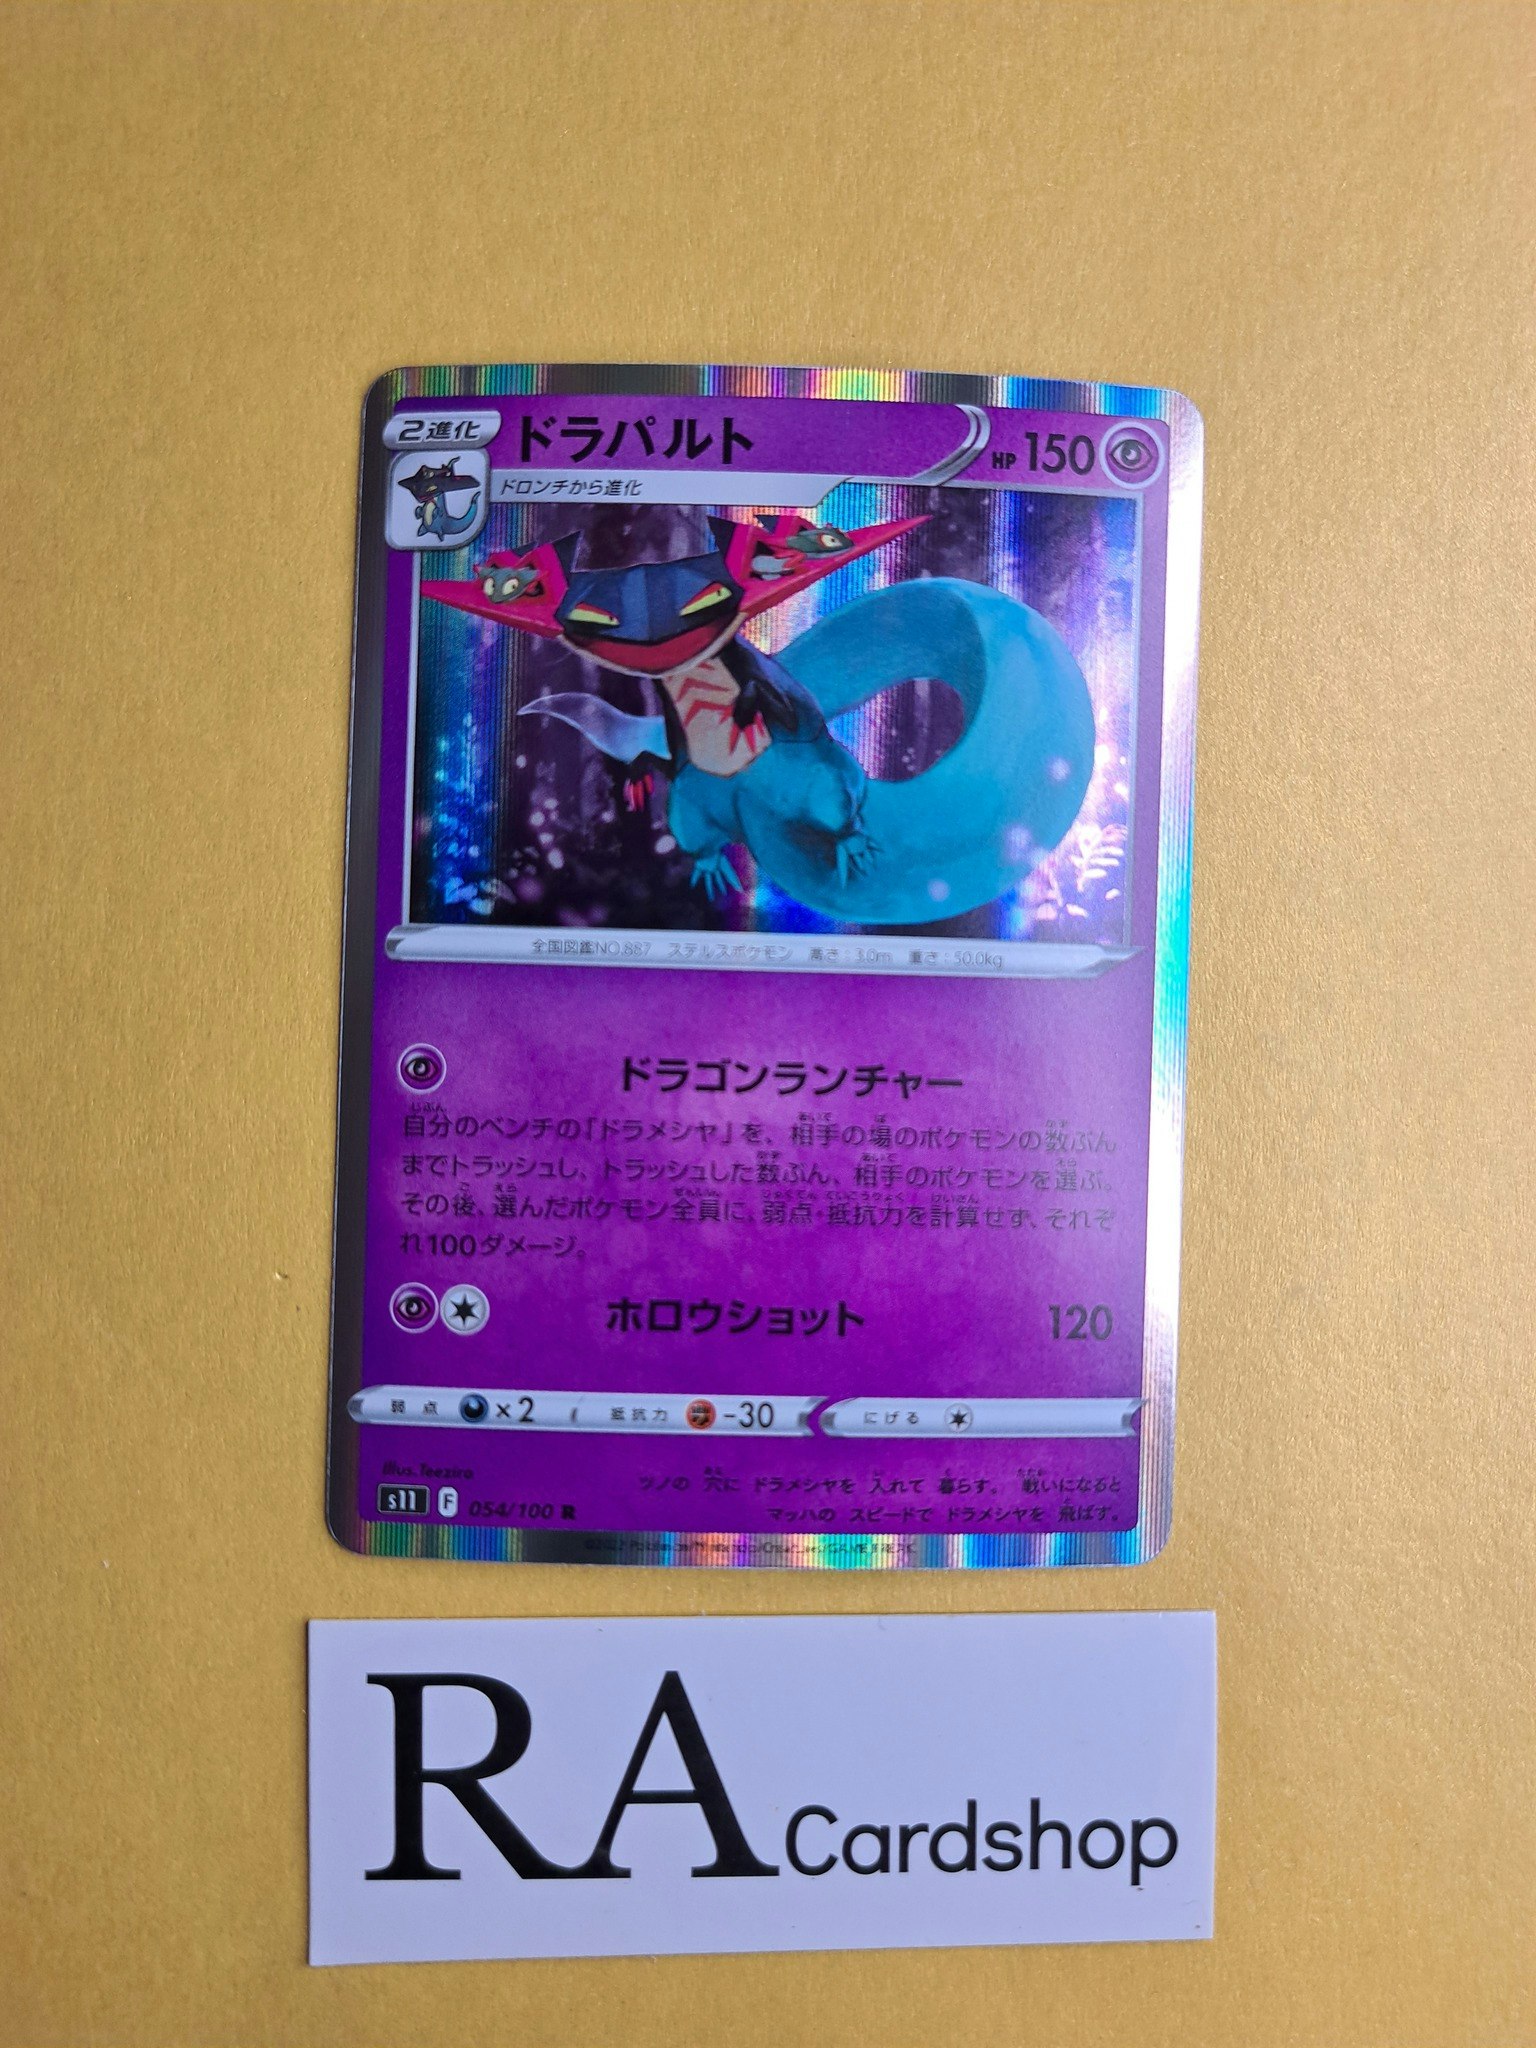 Dragapult Rare Holo 054/100 Lost Abyss s11 Pokemon